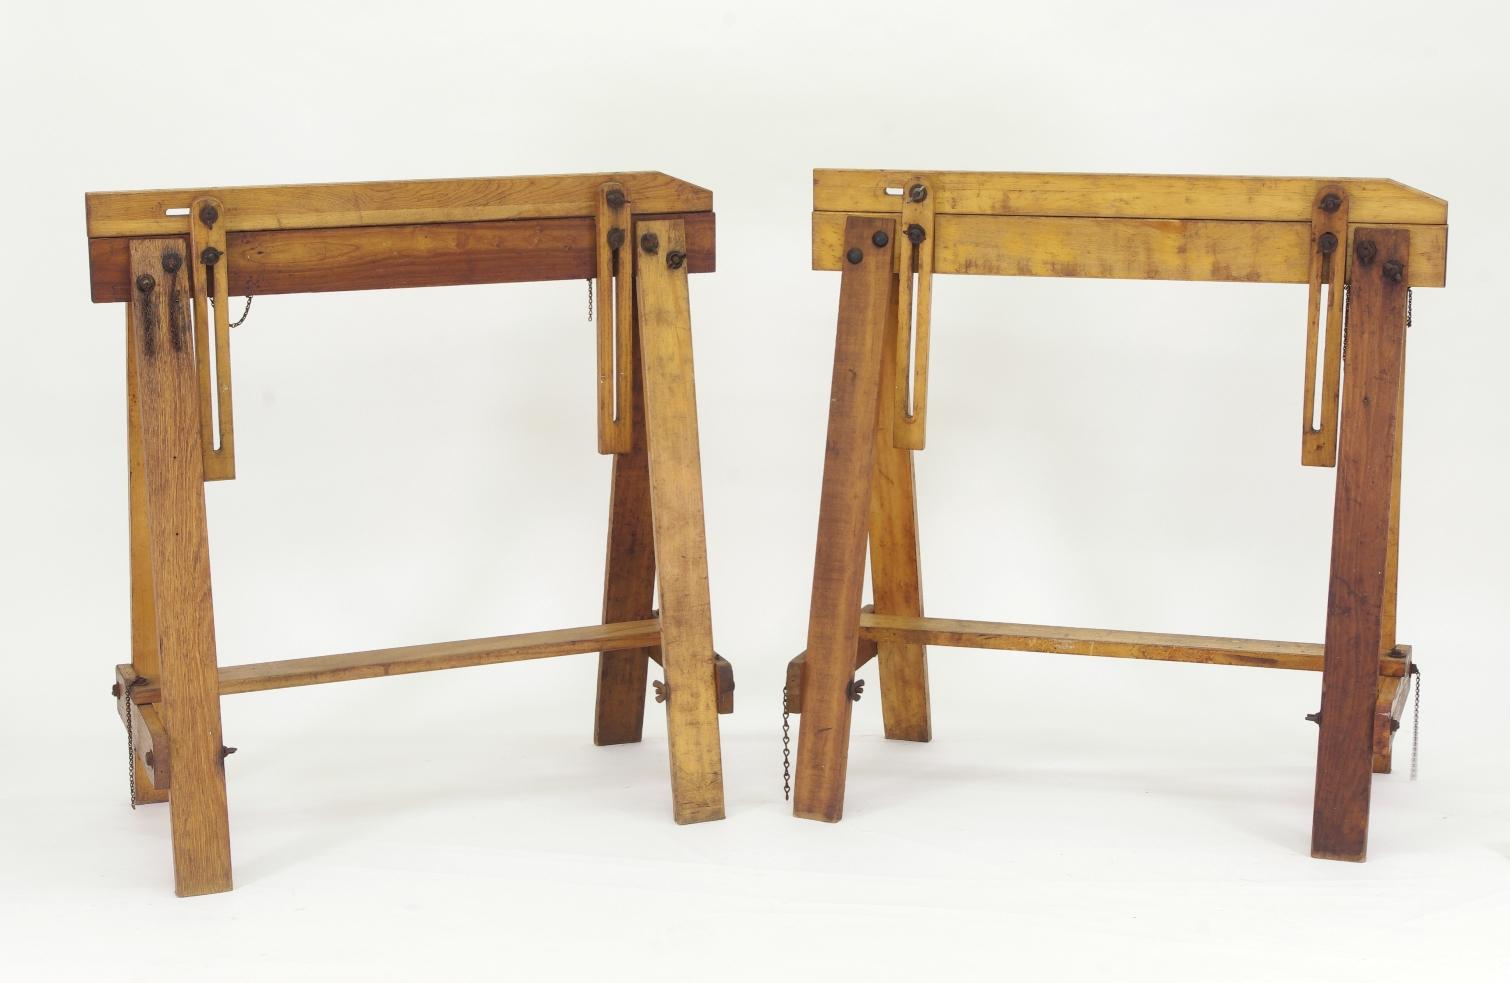 Pair of vintage adjustable saw horses, each fastened together with iron wing-nuts and bolts.
The white stenciling reads on the left horse in the lead photo reads, 